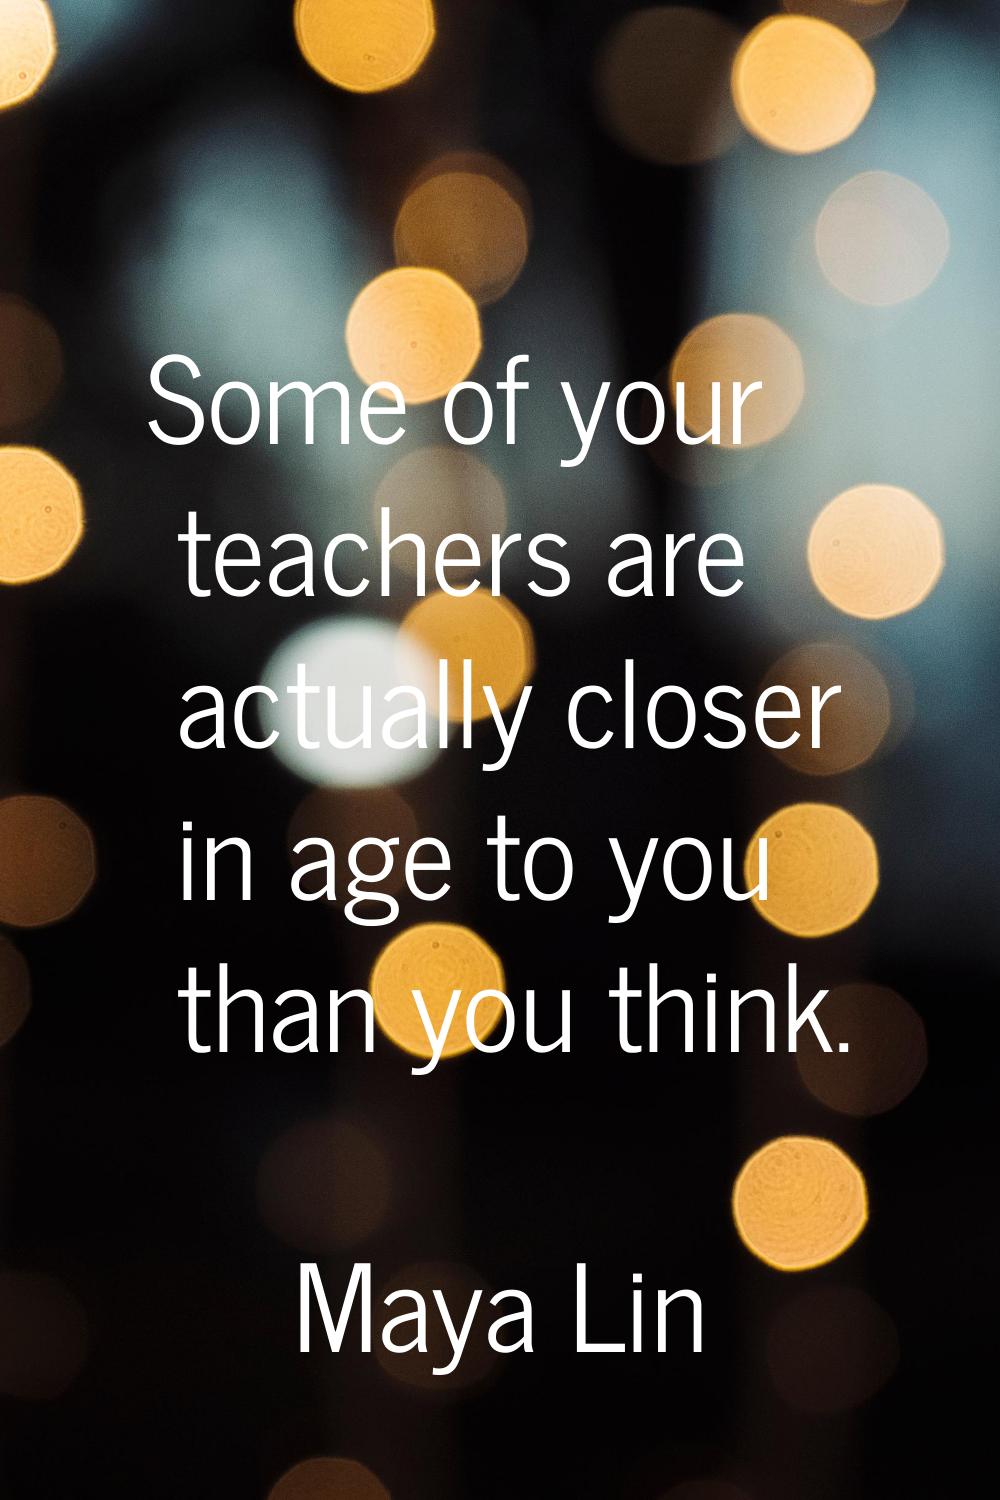 Some of your teachers are actually closer in age to you than you think.